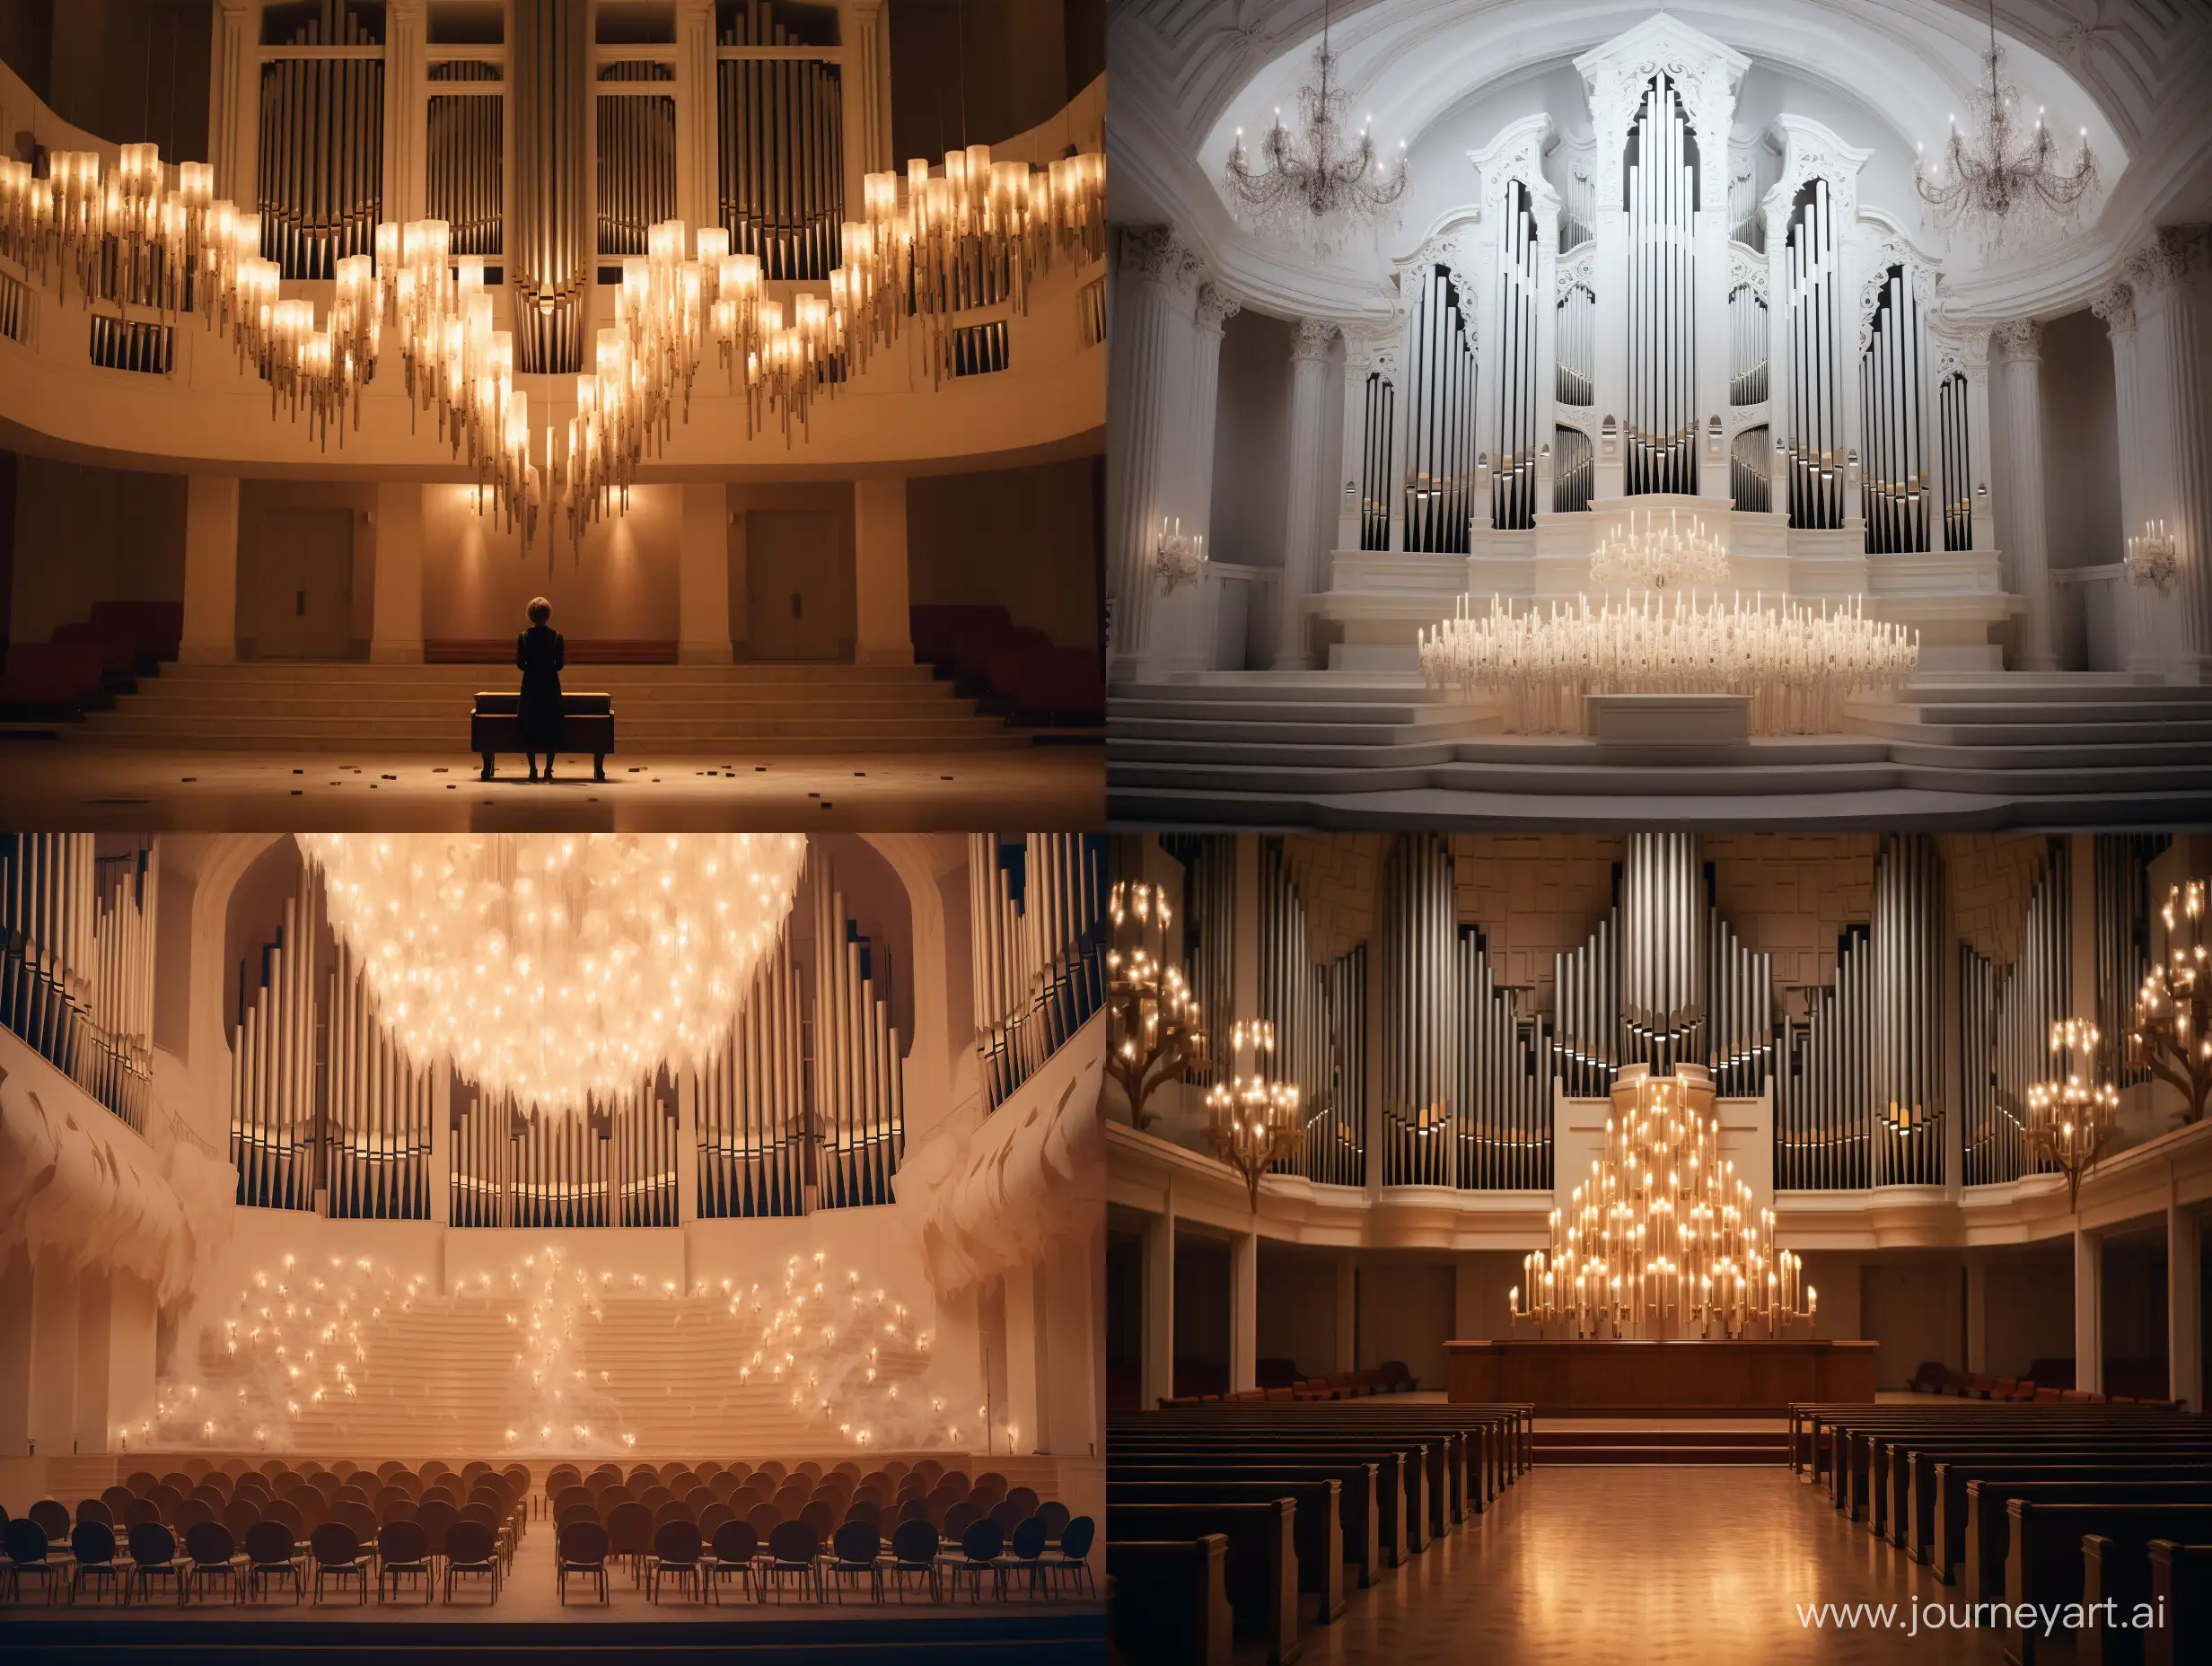 Elegant-Organ-Performance-by-Candlelight-in-the-White-Concert-Hall